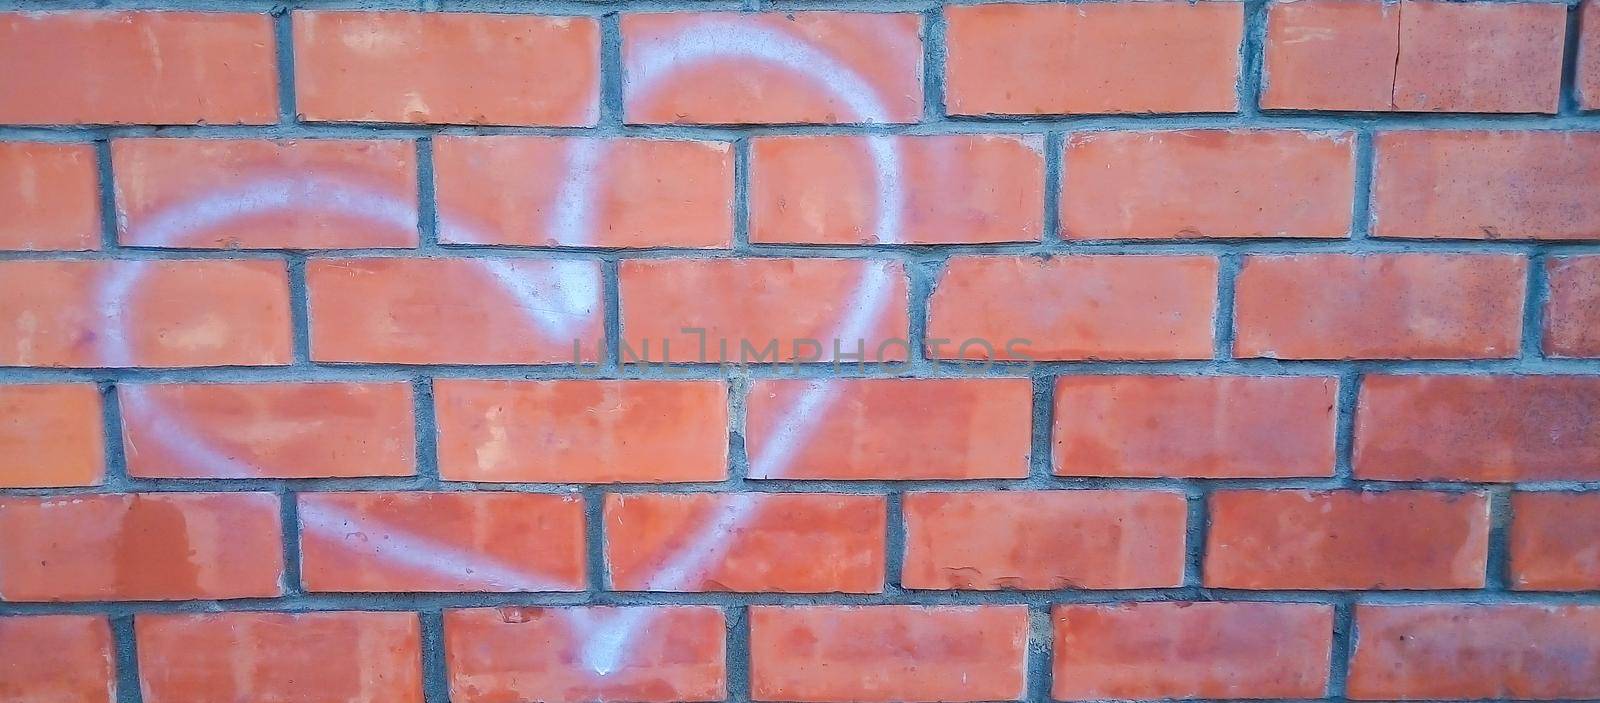 Red brick wall with white heart-shaped outlines.